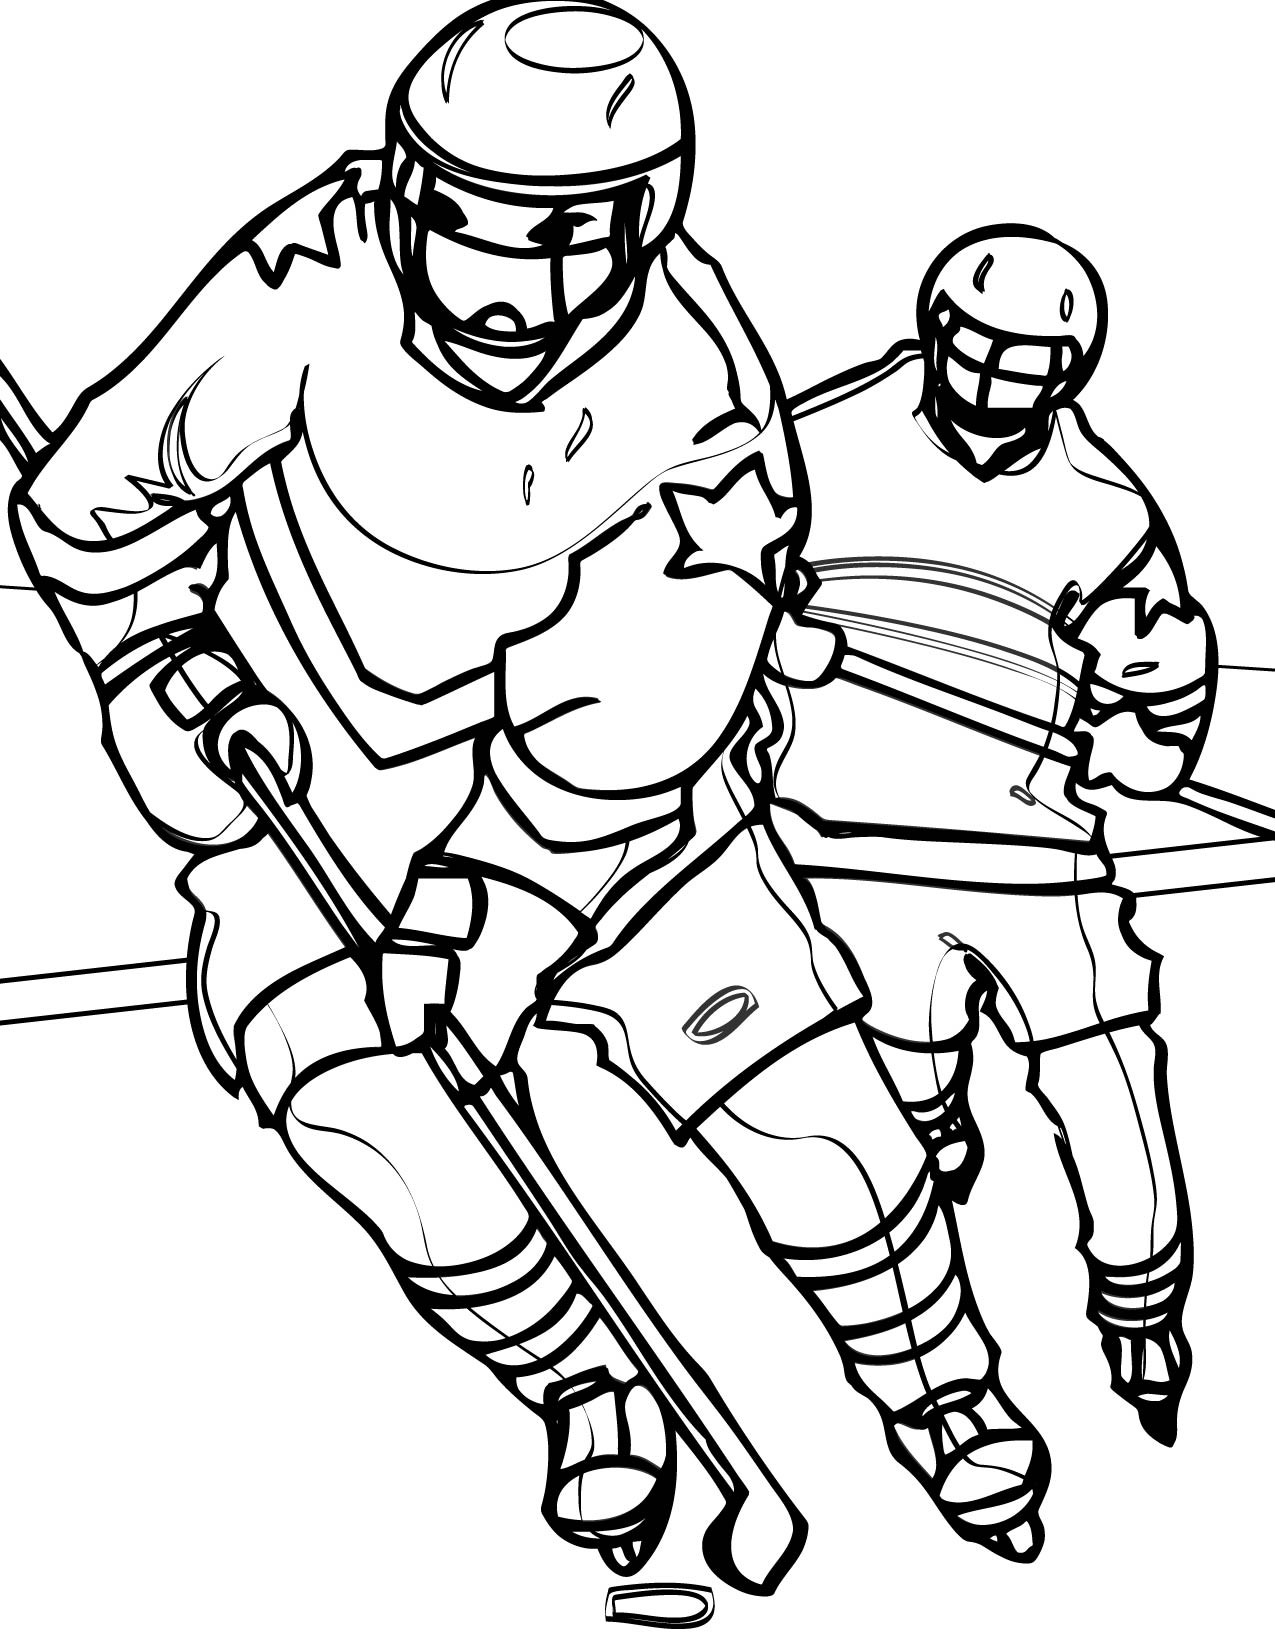 Printable Sports Coloring Pages
 Feild Hockey Sports Coloring Pages Coloring Pages